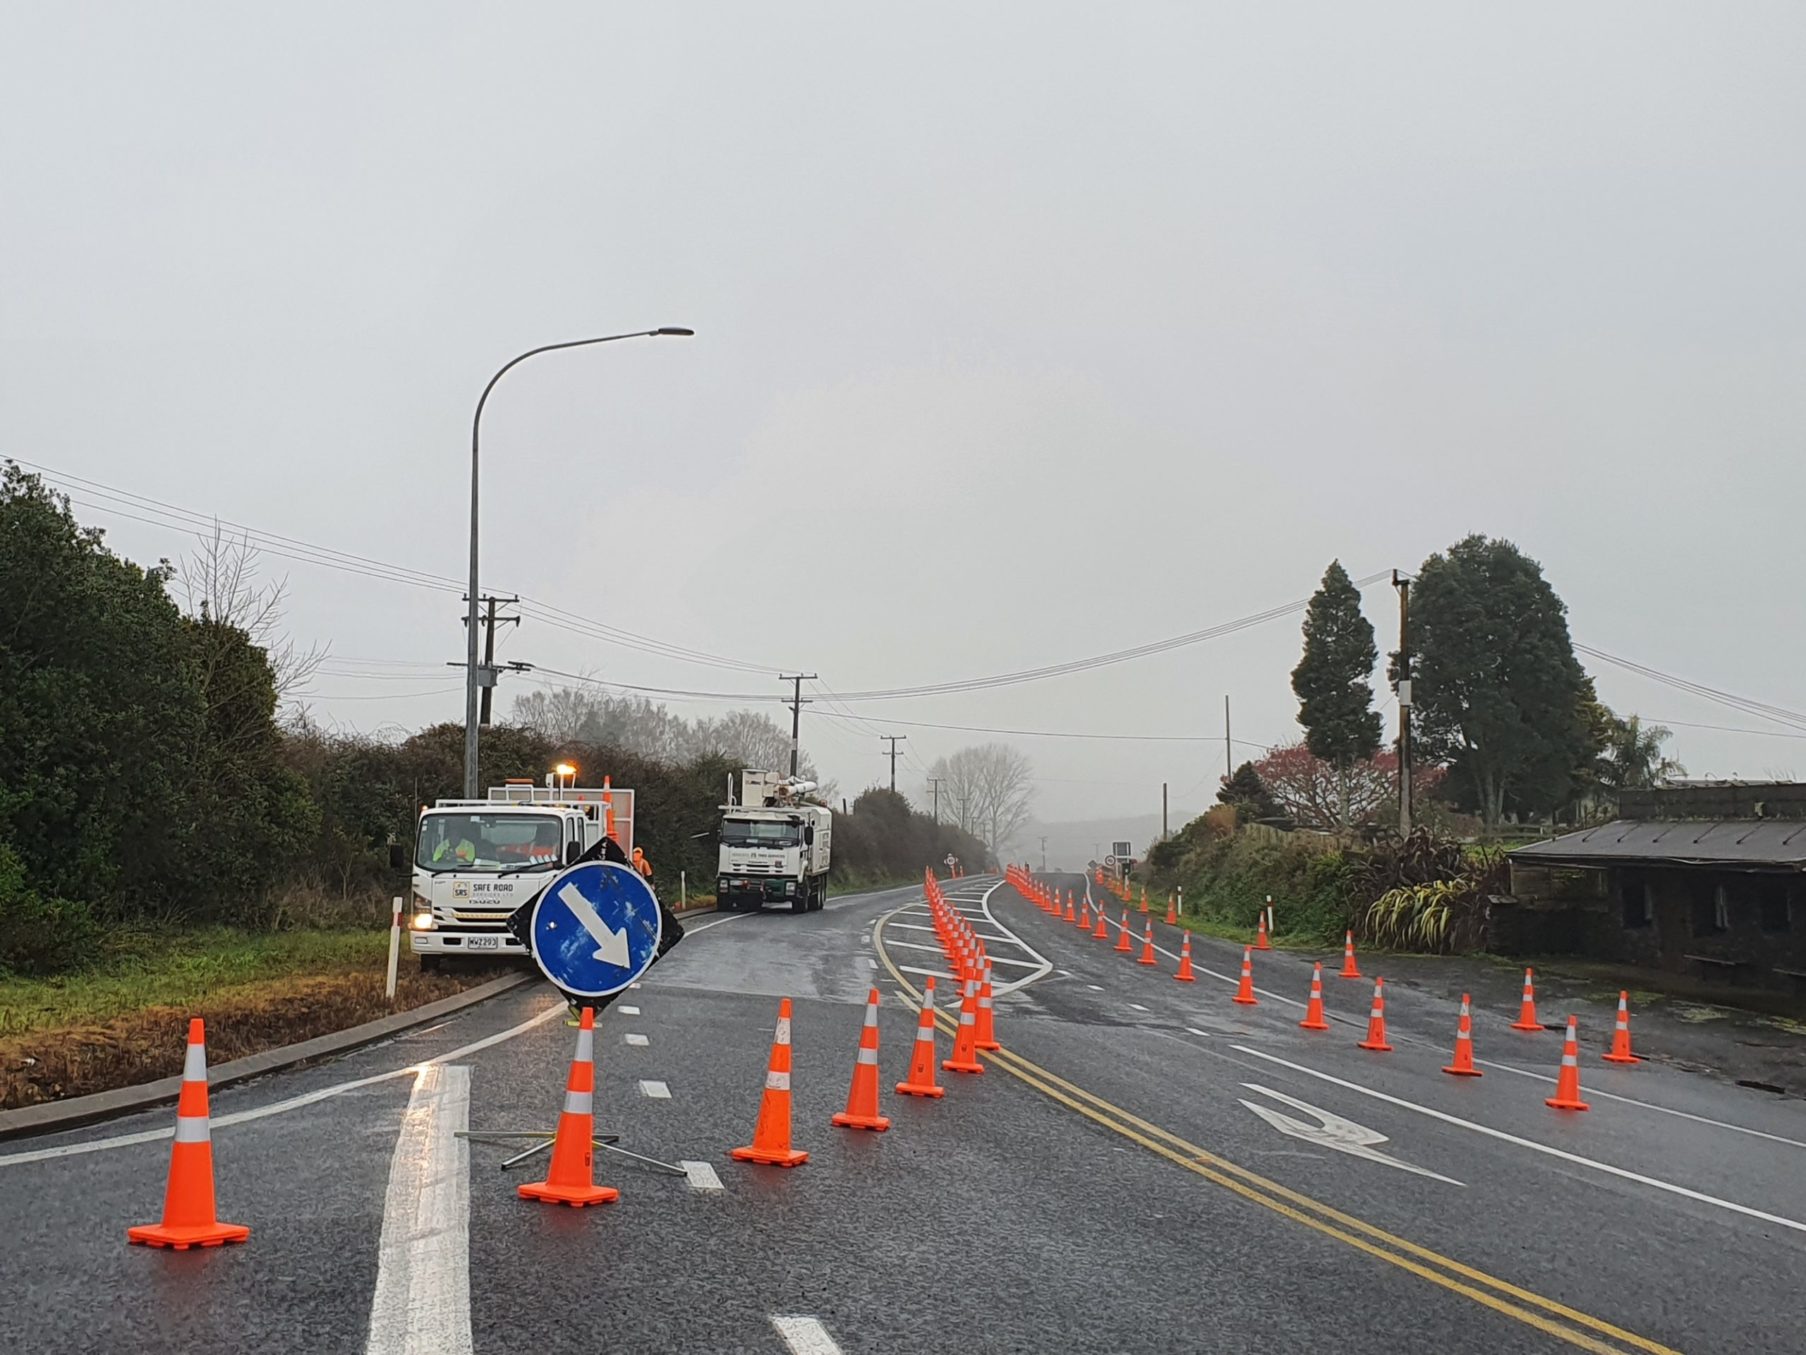 A Lane Diversion in Parawera for Arborists to complete tree works